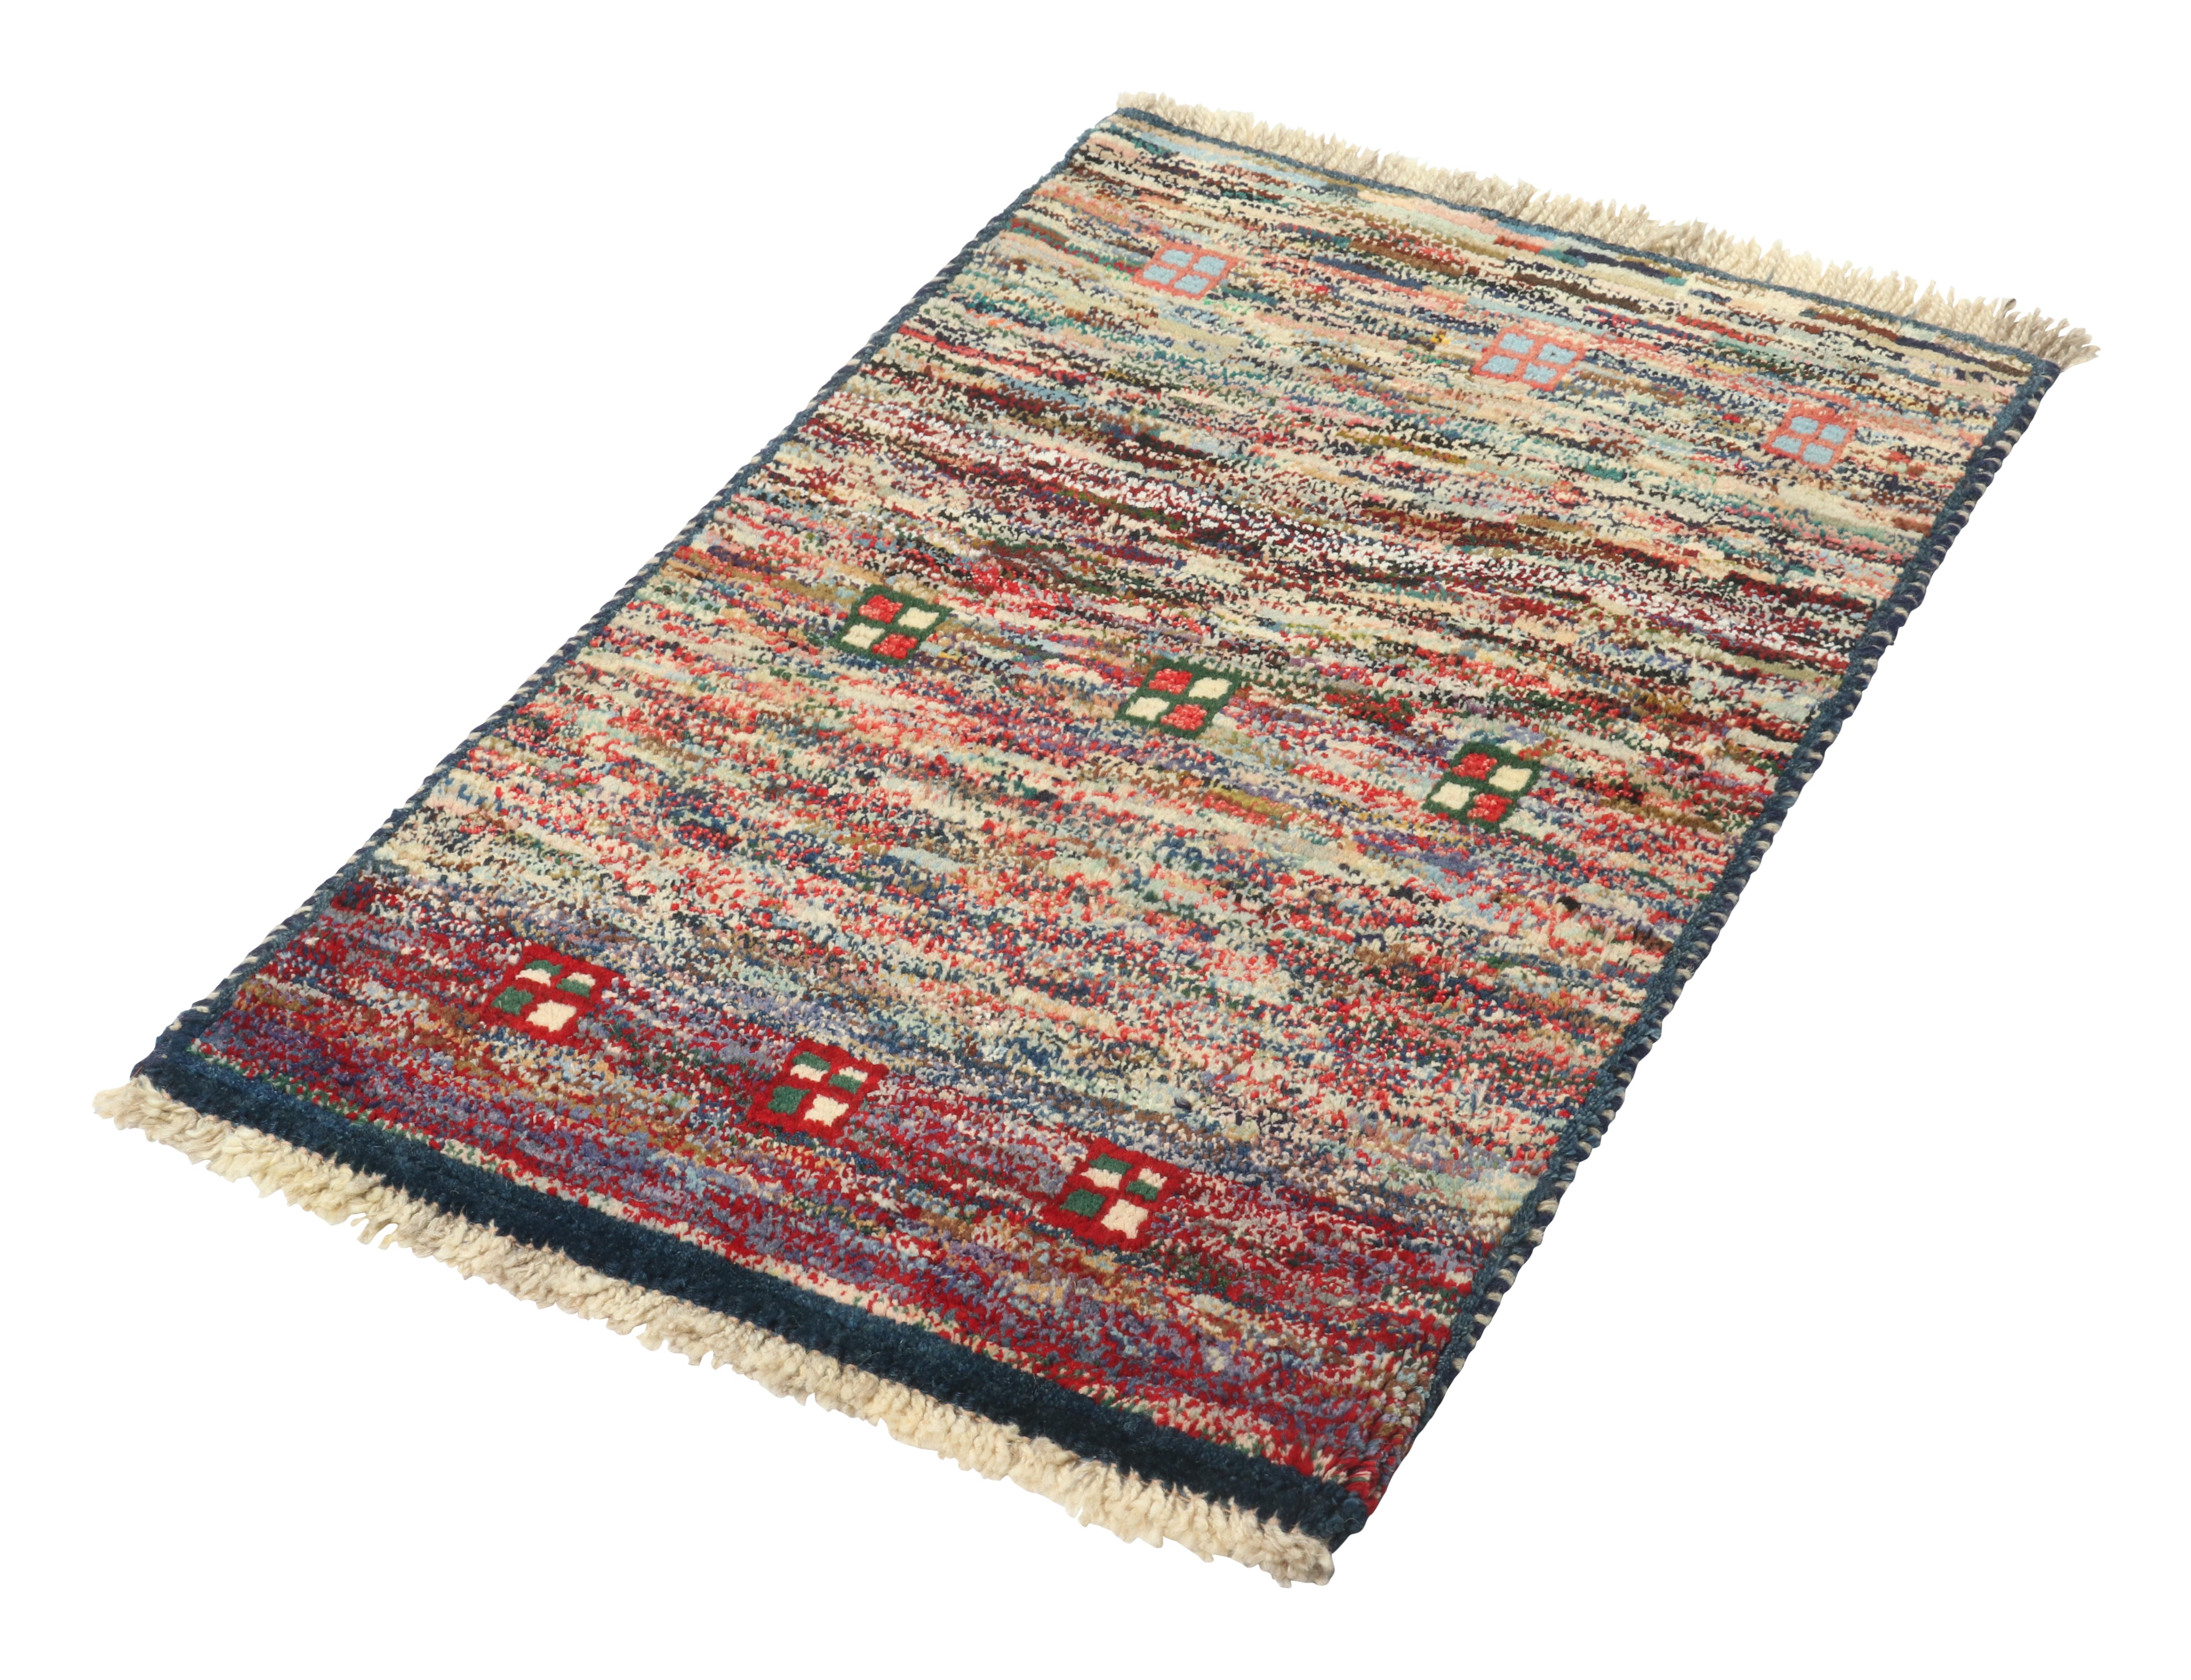 A vintage 2x3 Persian Gabbeh rug from Rug & Kilim’s newest curation of rare tribal pieces. Hand-knotted in wool circa 1950-1960.

On the design: 

This mid-century piece enjoys a gorgeous play of polychromatic tones sometimes seen in this